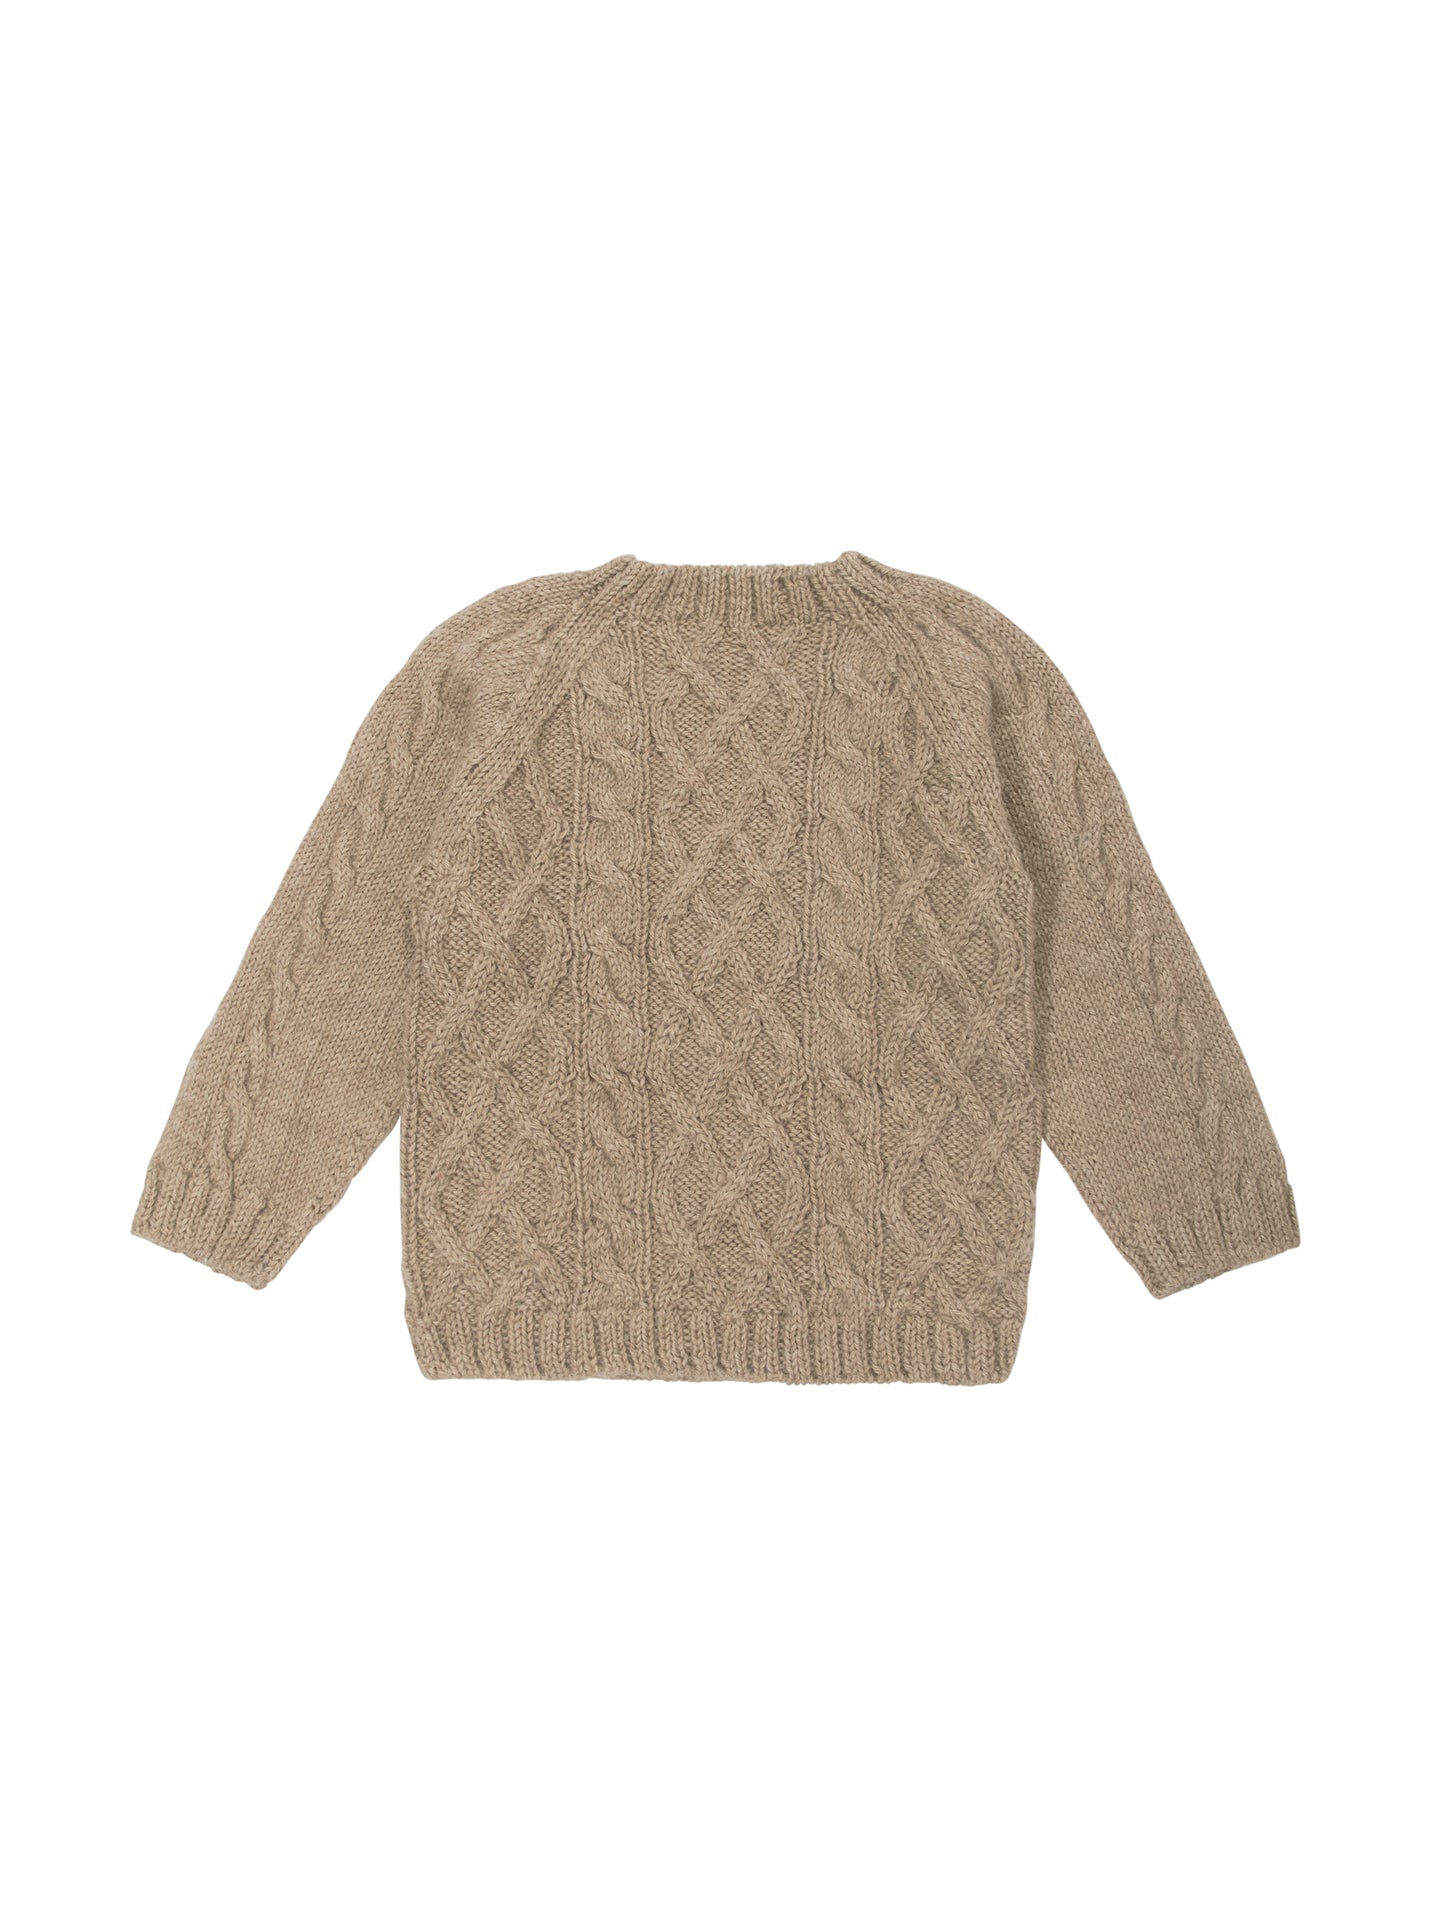 Baby Alpaca Taupe Cable Knit Sweater Weston Table